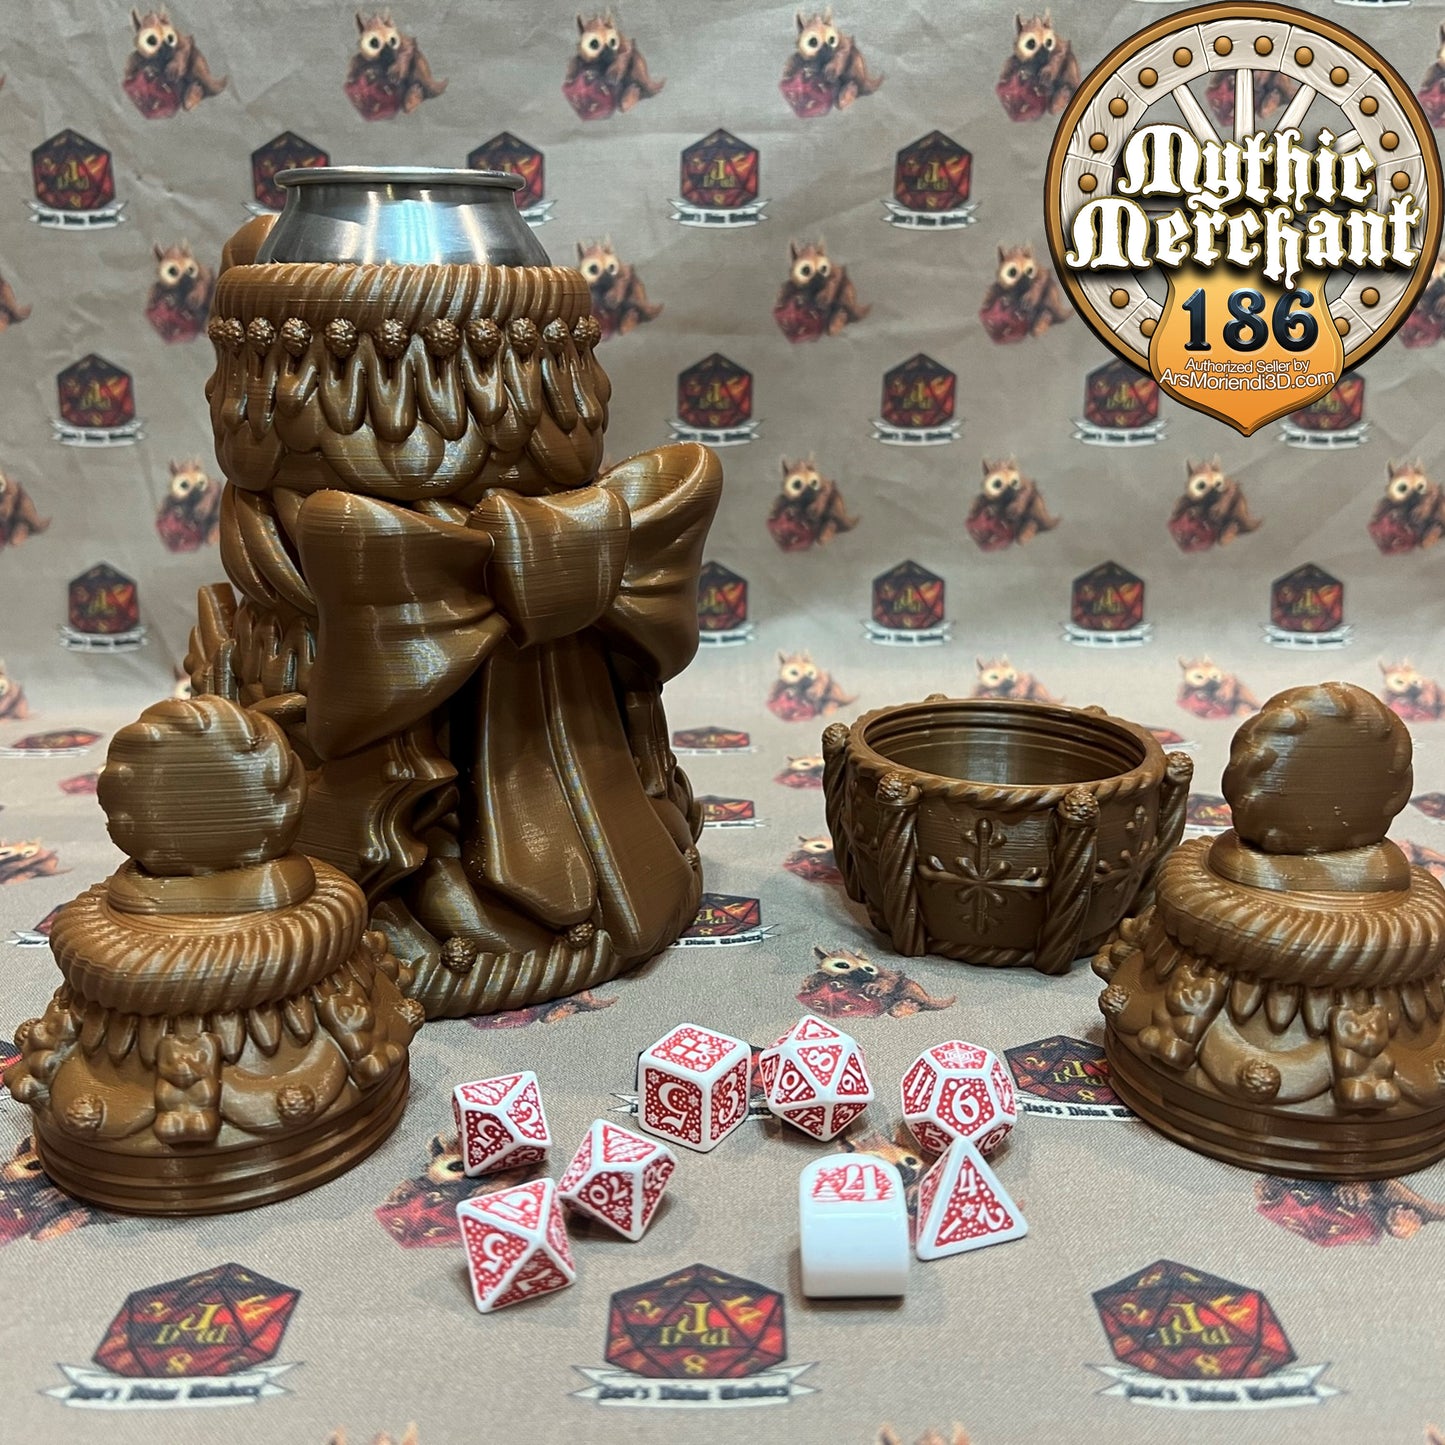 Gingerbread Can Holder Mythic Mug from Ars Moriendi 3D - Dungeons and Dragons, Pathfinder, TTRPG, Dice Cup/Roller